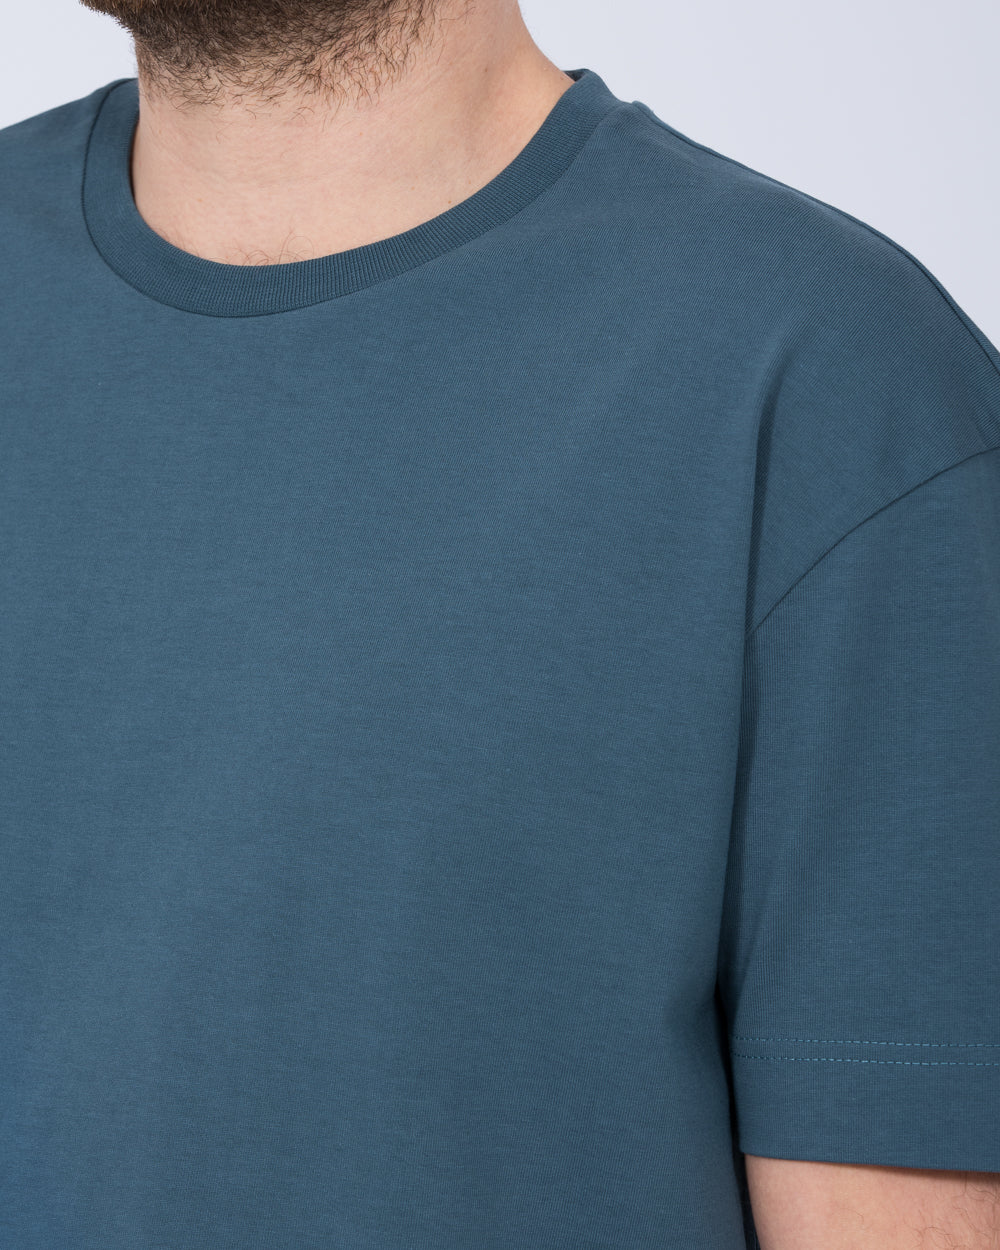 2t Bruno Tall Oversized T-Shirt (teal)